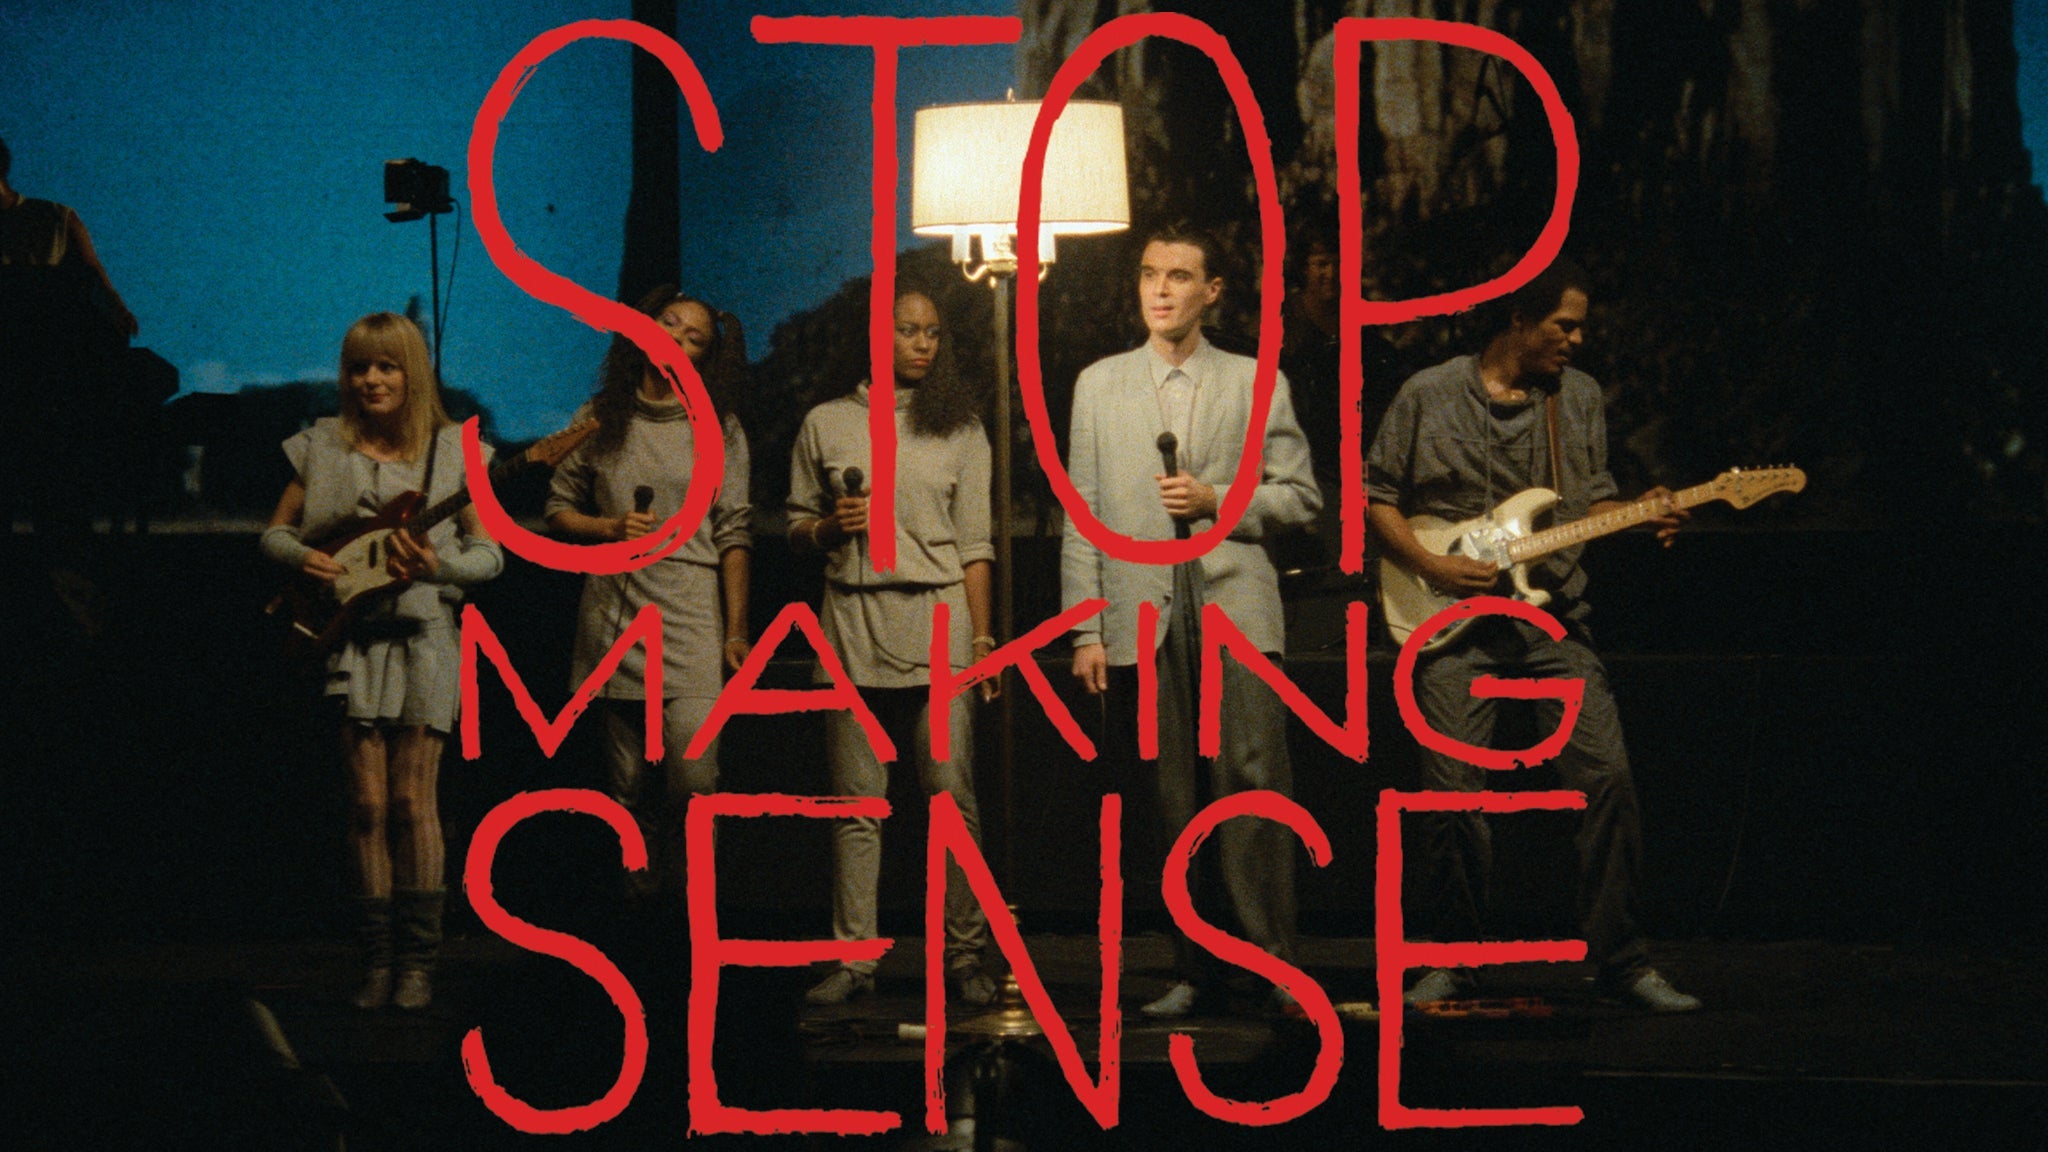 Stop Making Sense: A Once in a Lifetime Movie Party in Washington promo photo for F.W.B. Previous Buyers presale offer code